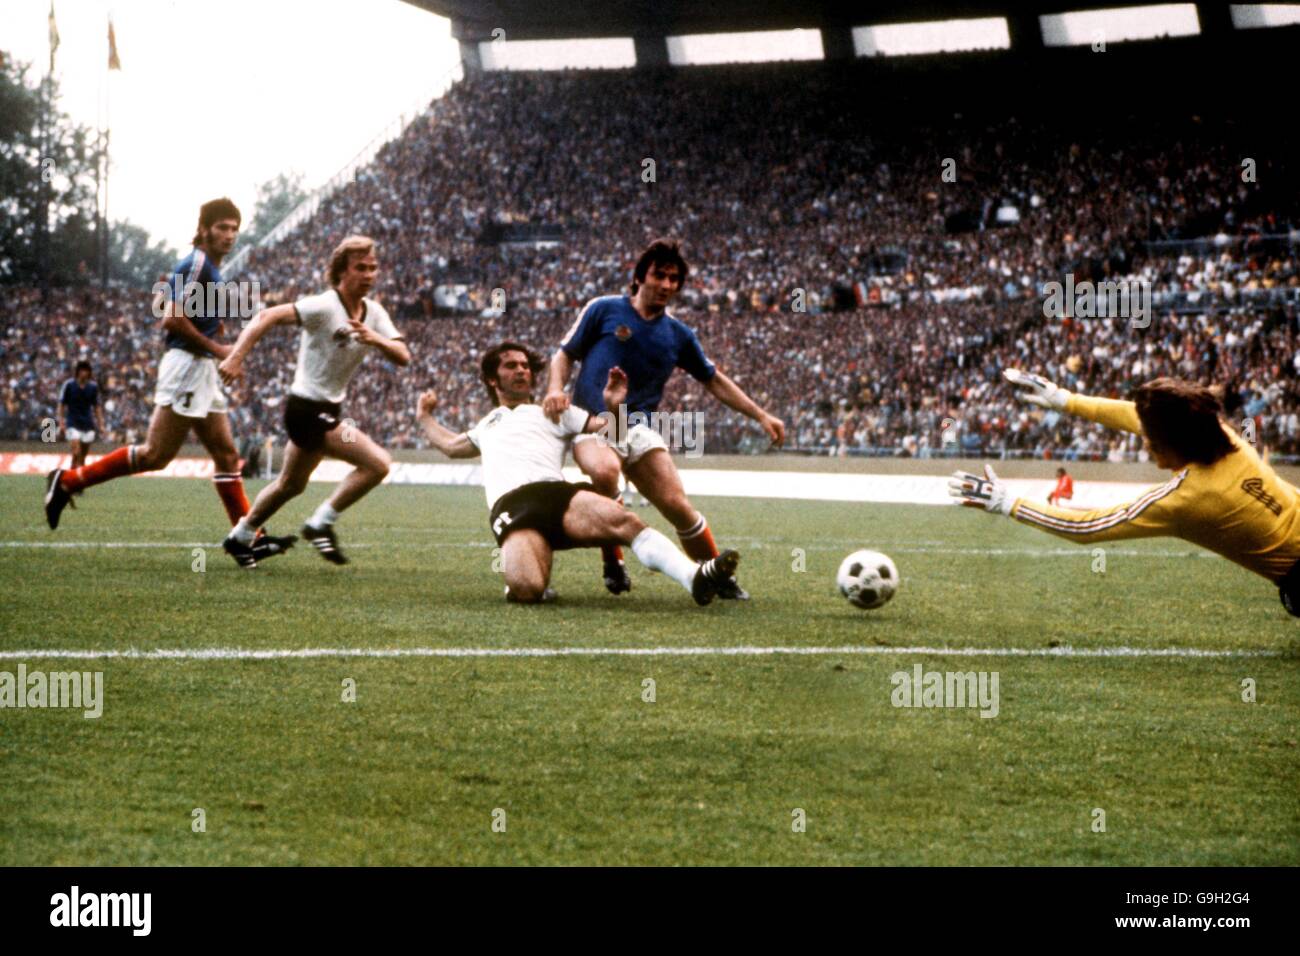 West Germany's Gerd Muller (c) beats Yugoslavia's Josip Katalinski (second r) to the ball to score the second goal past goalkeeper Enver Maric (r) Stock Photo